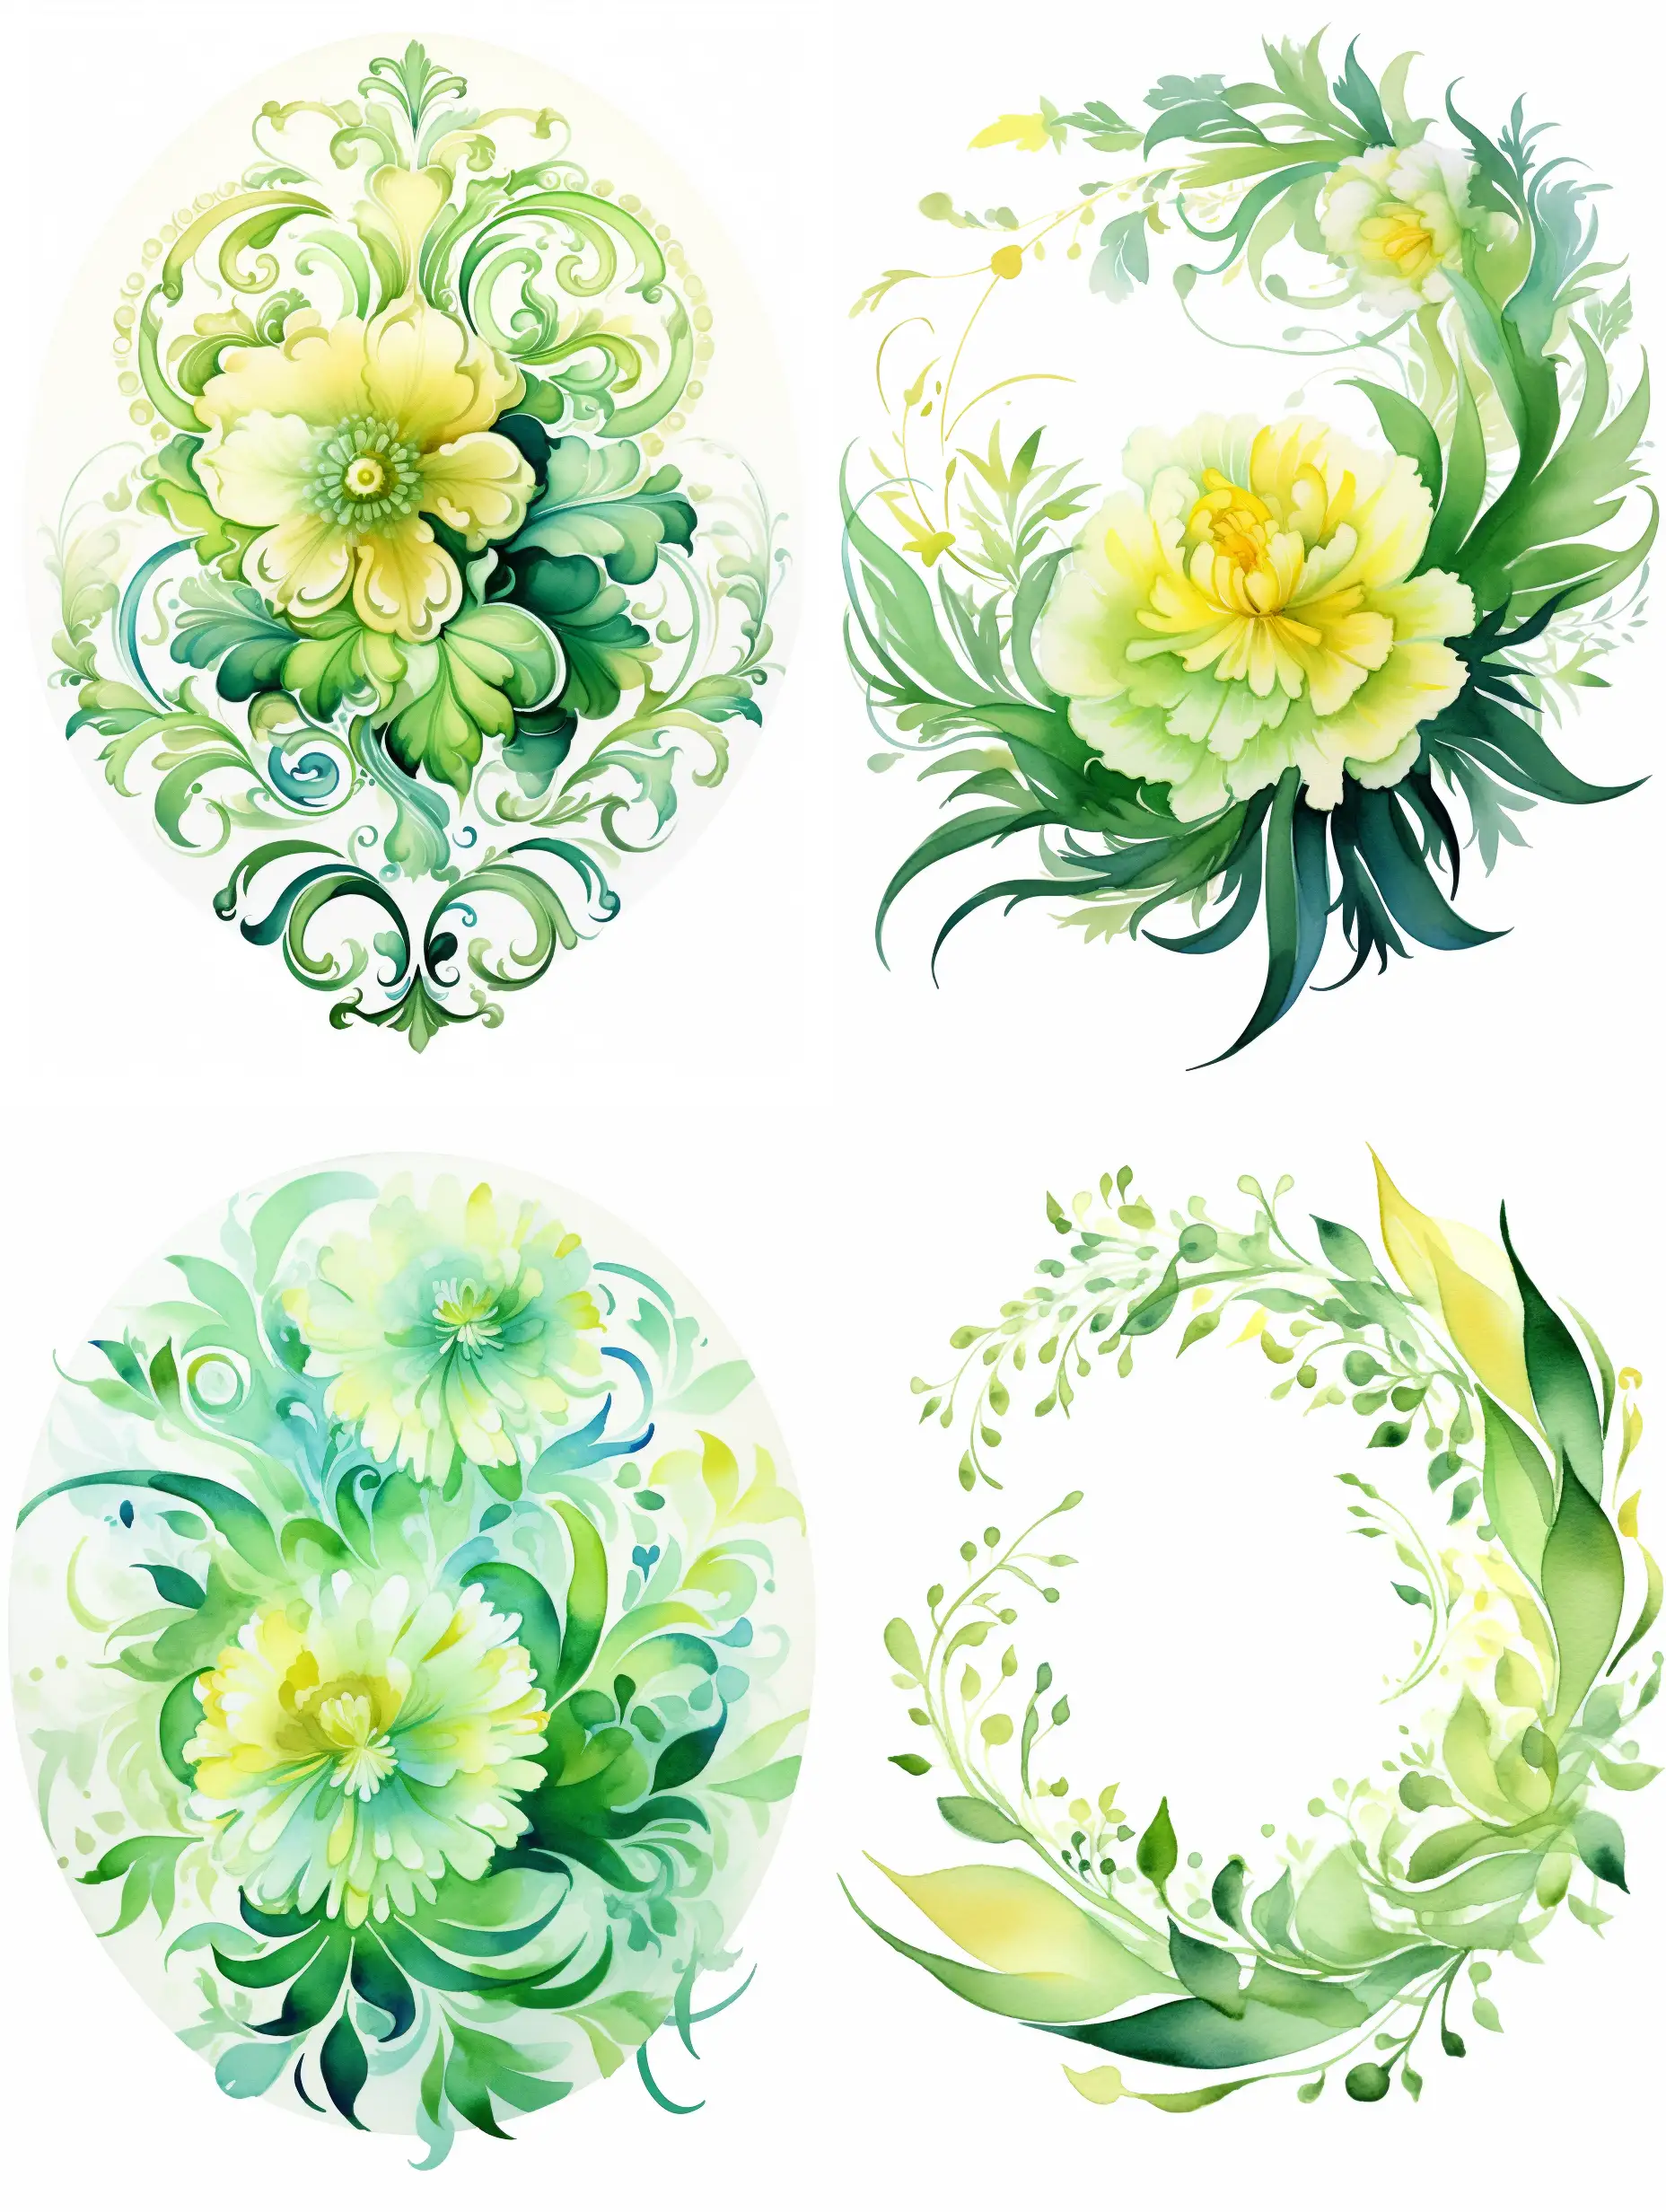 Cheerful-Summer-Baroque-Round-Ornament-with-Green-Elements-on-White-Background